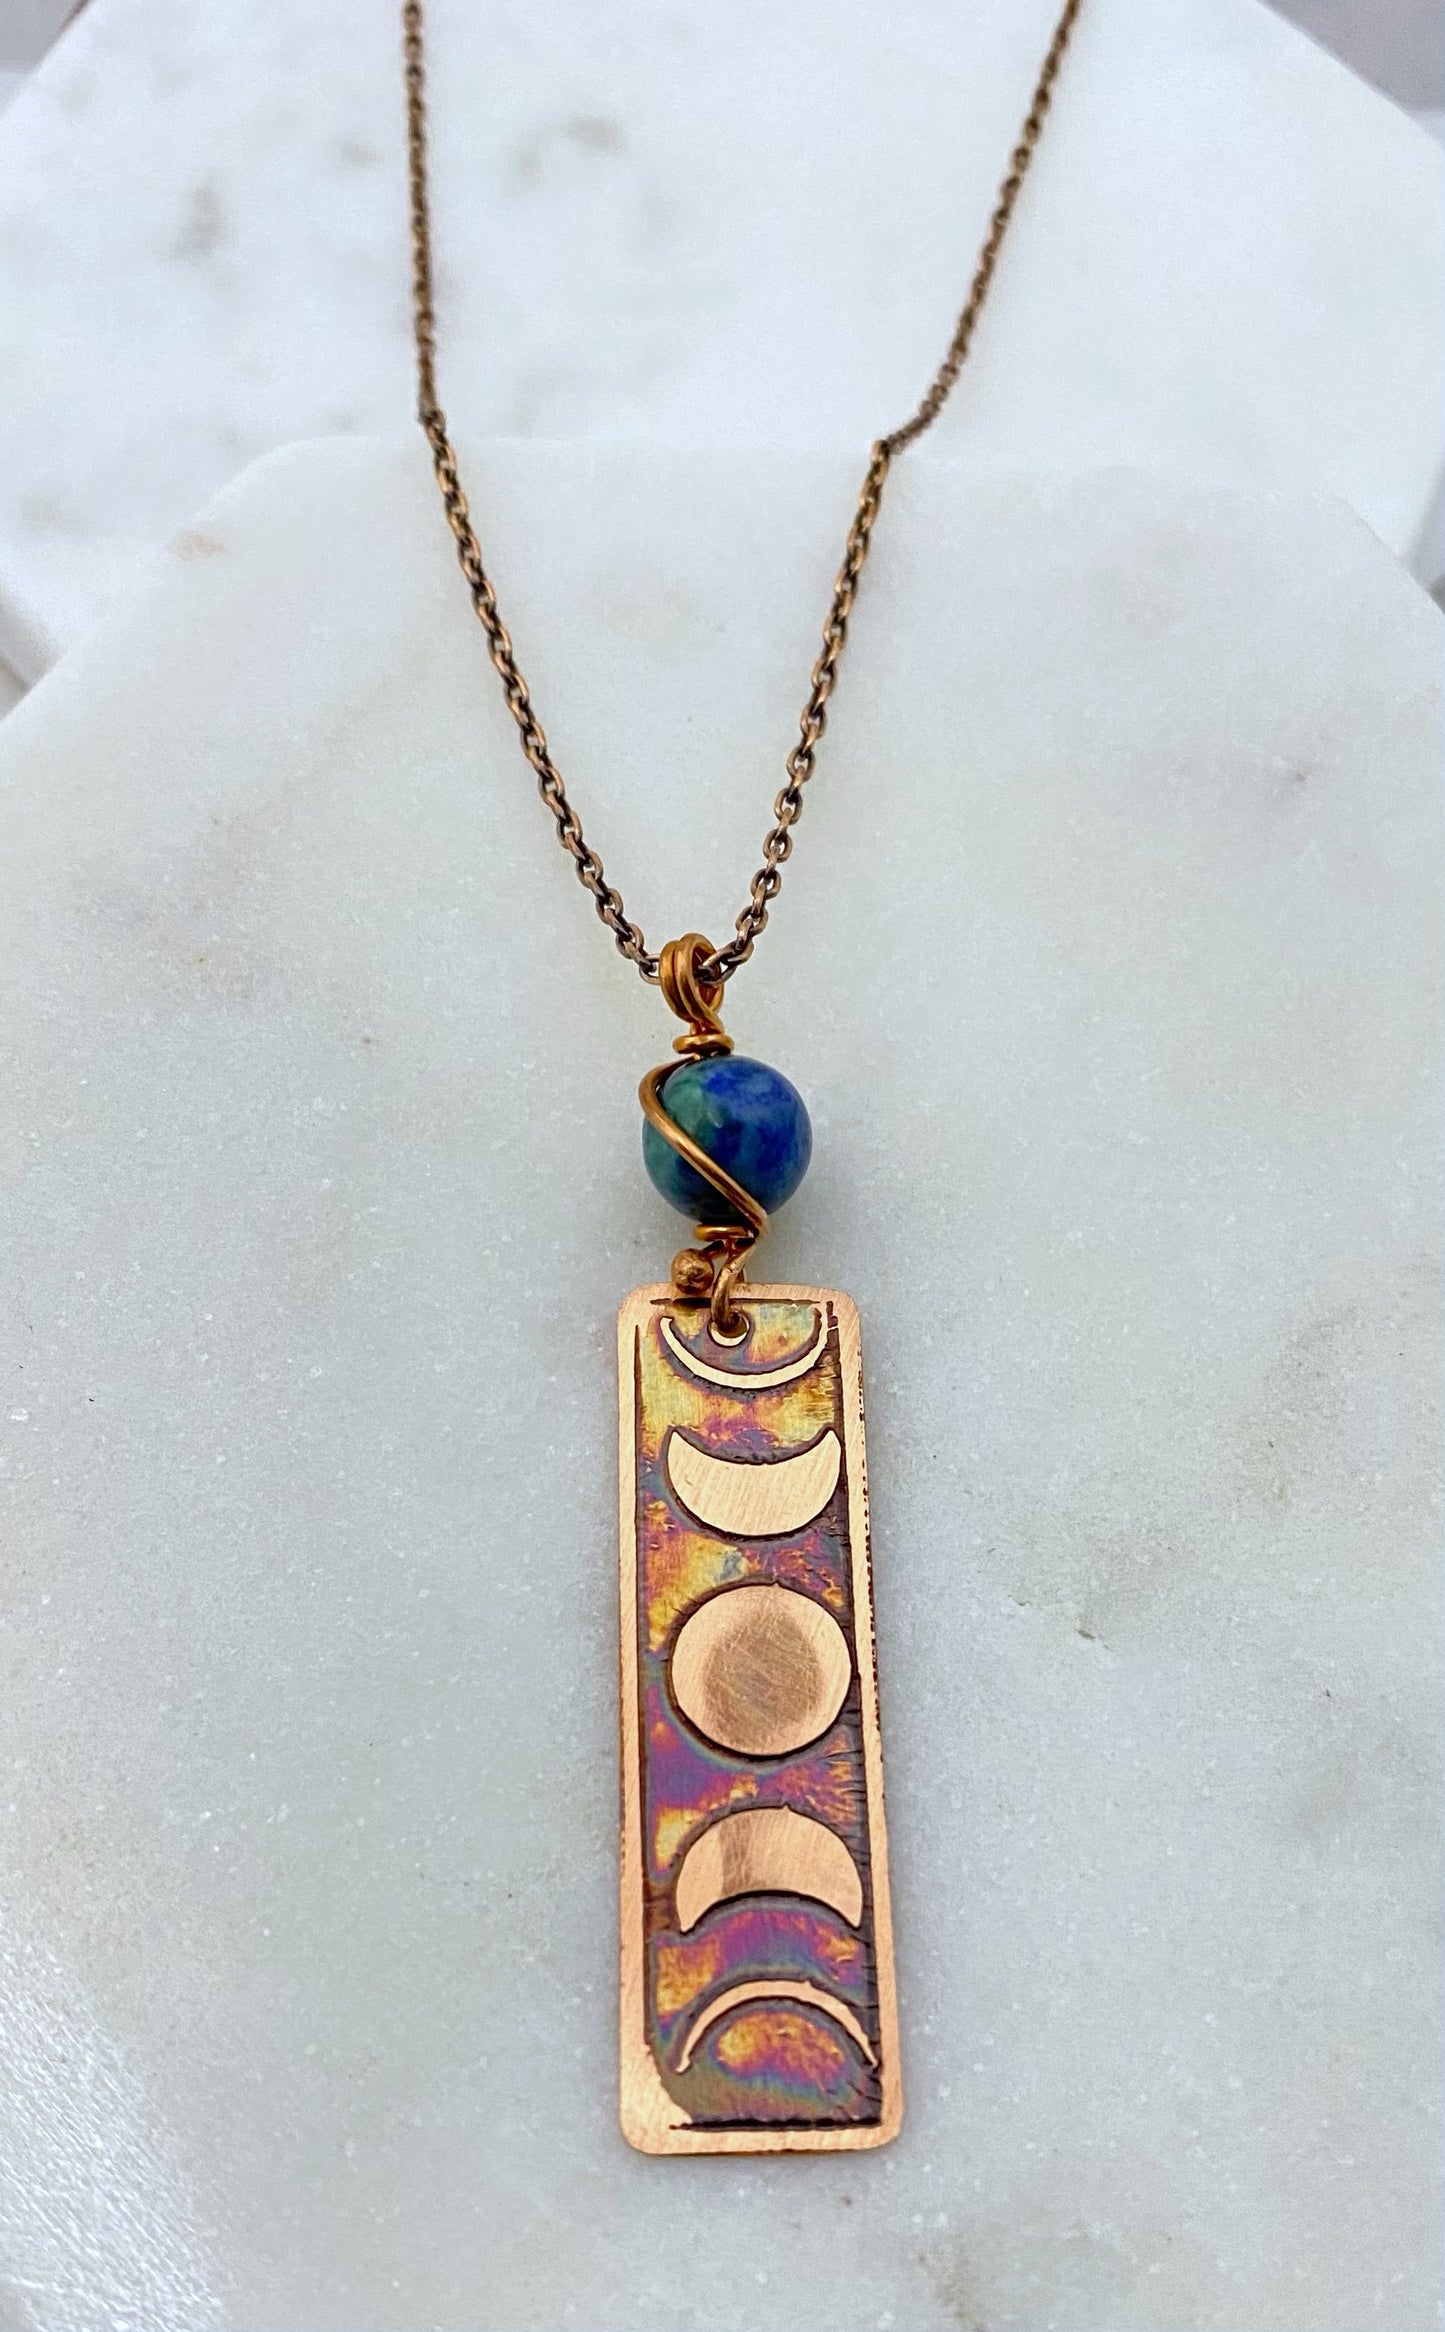 Moon phase necklace, copper with azurite chrysocolla gemstone